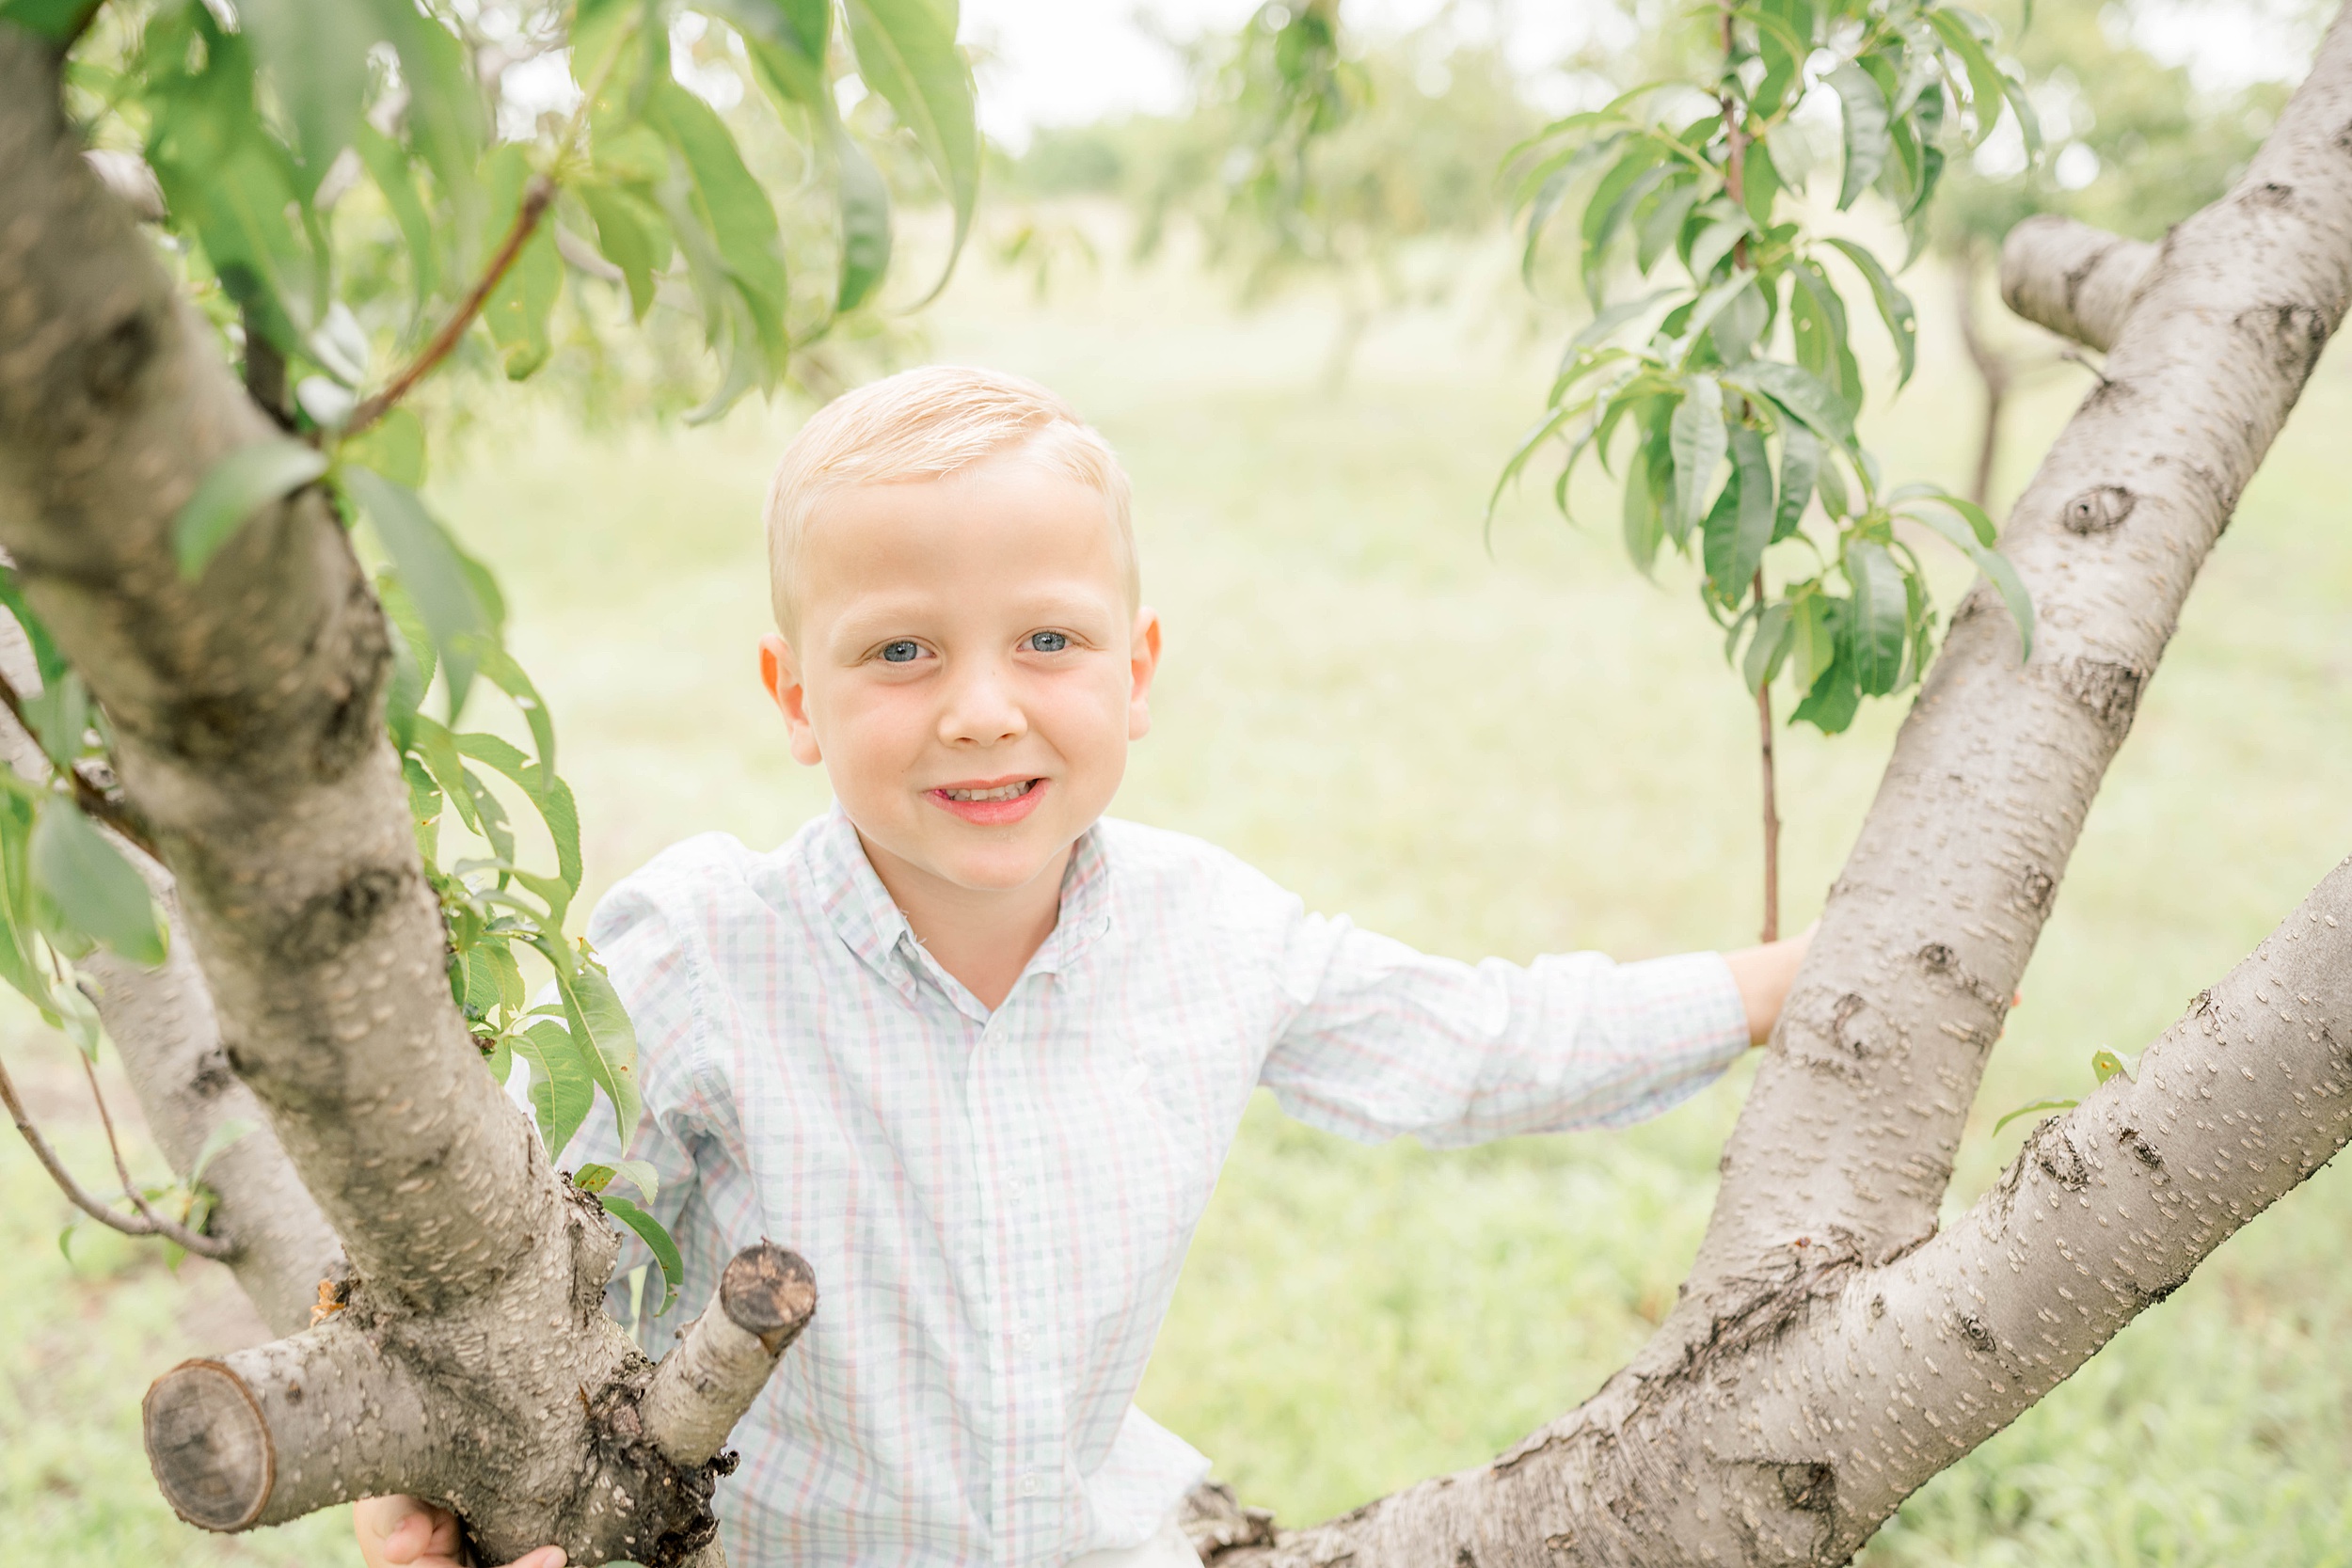 A young boy in a plaid shirt climbs a tree in a park after visiting oklahoma city preschools